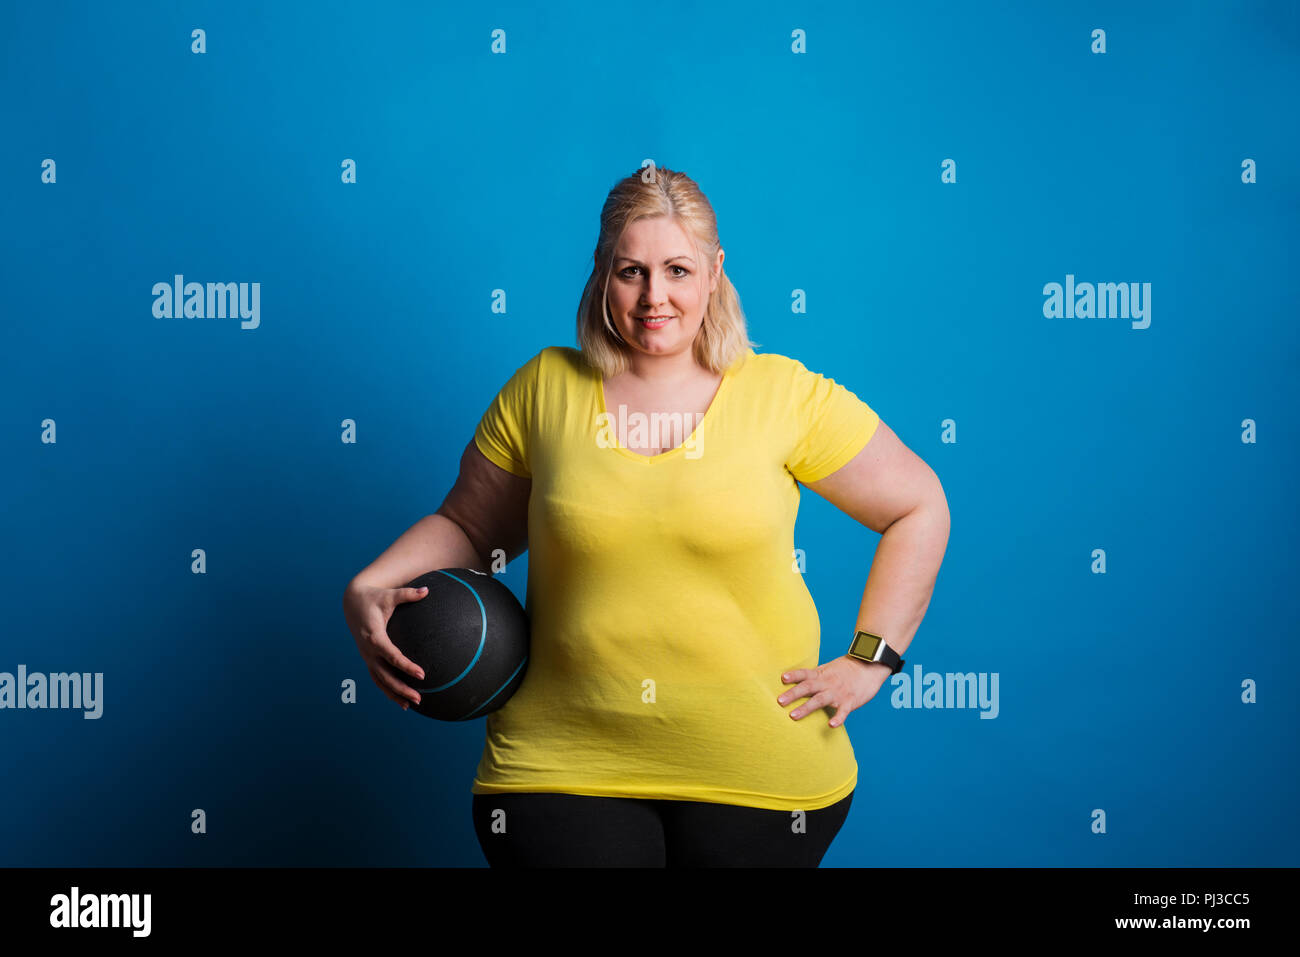 Portrait of a happy overweight woman with smartwatch and heavy ball in studio. Stock Photo